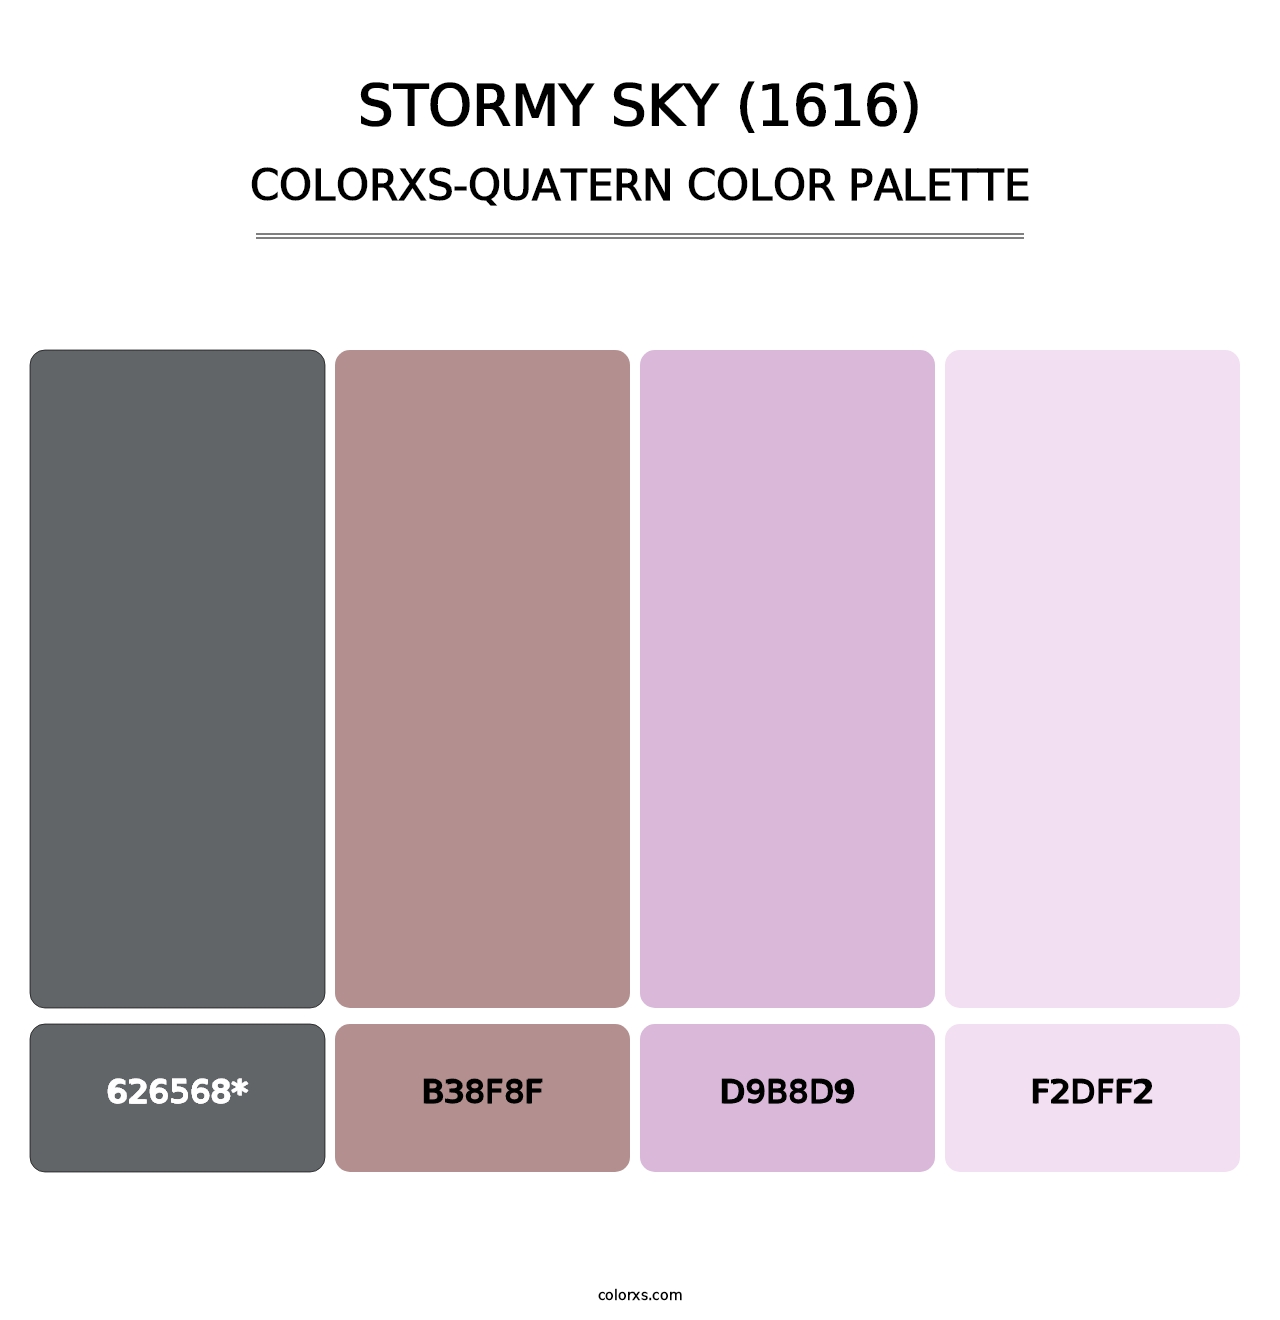 Stormy Sky (1616) - Colorxs Quatern Palette